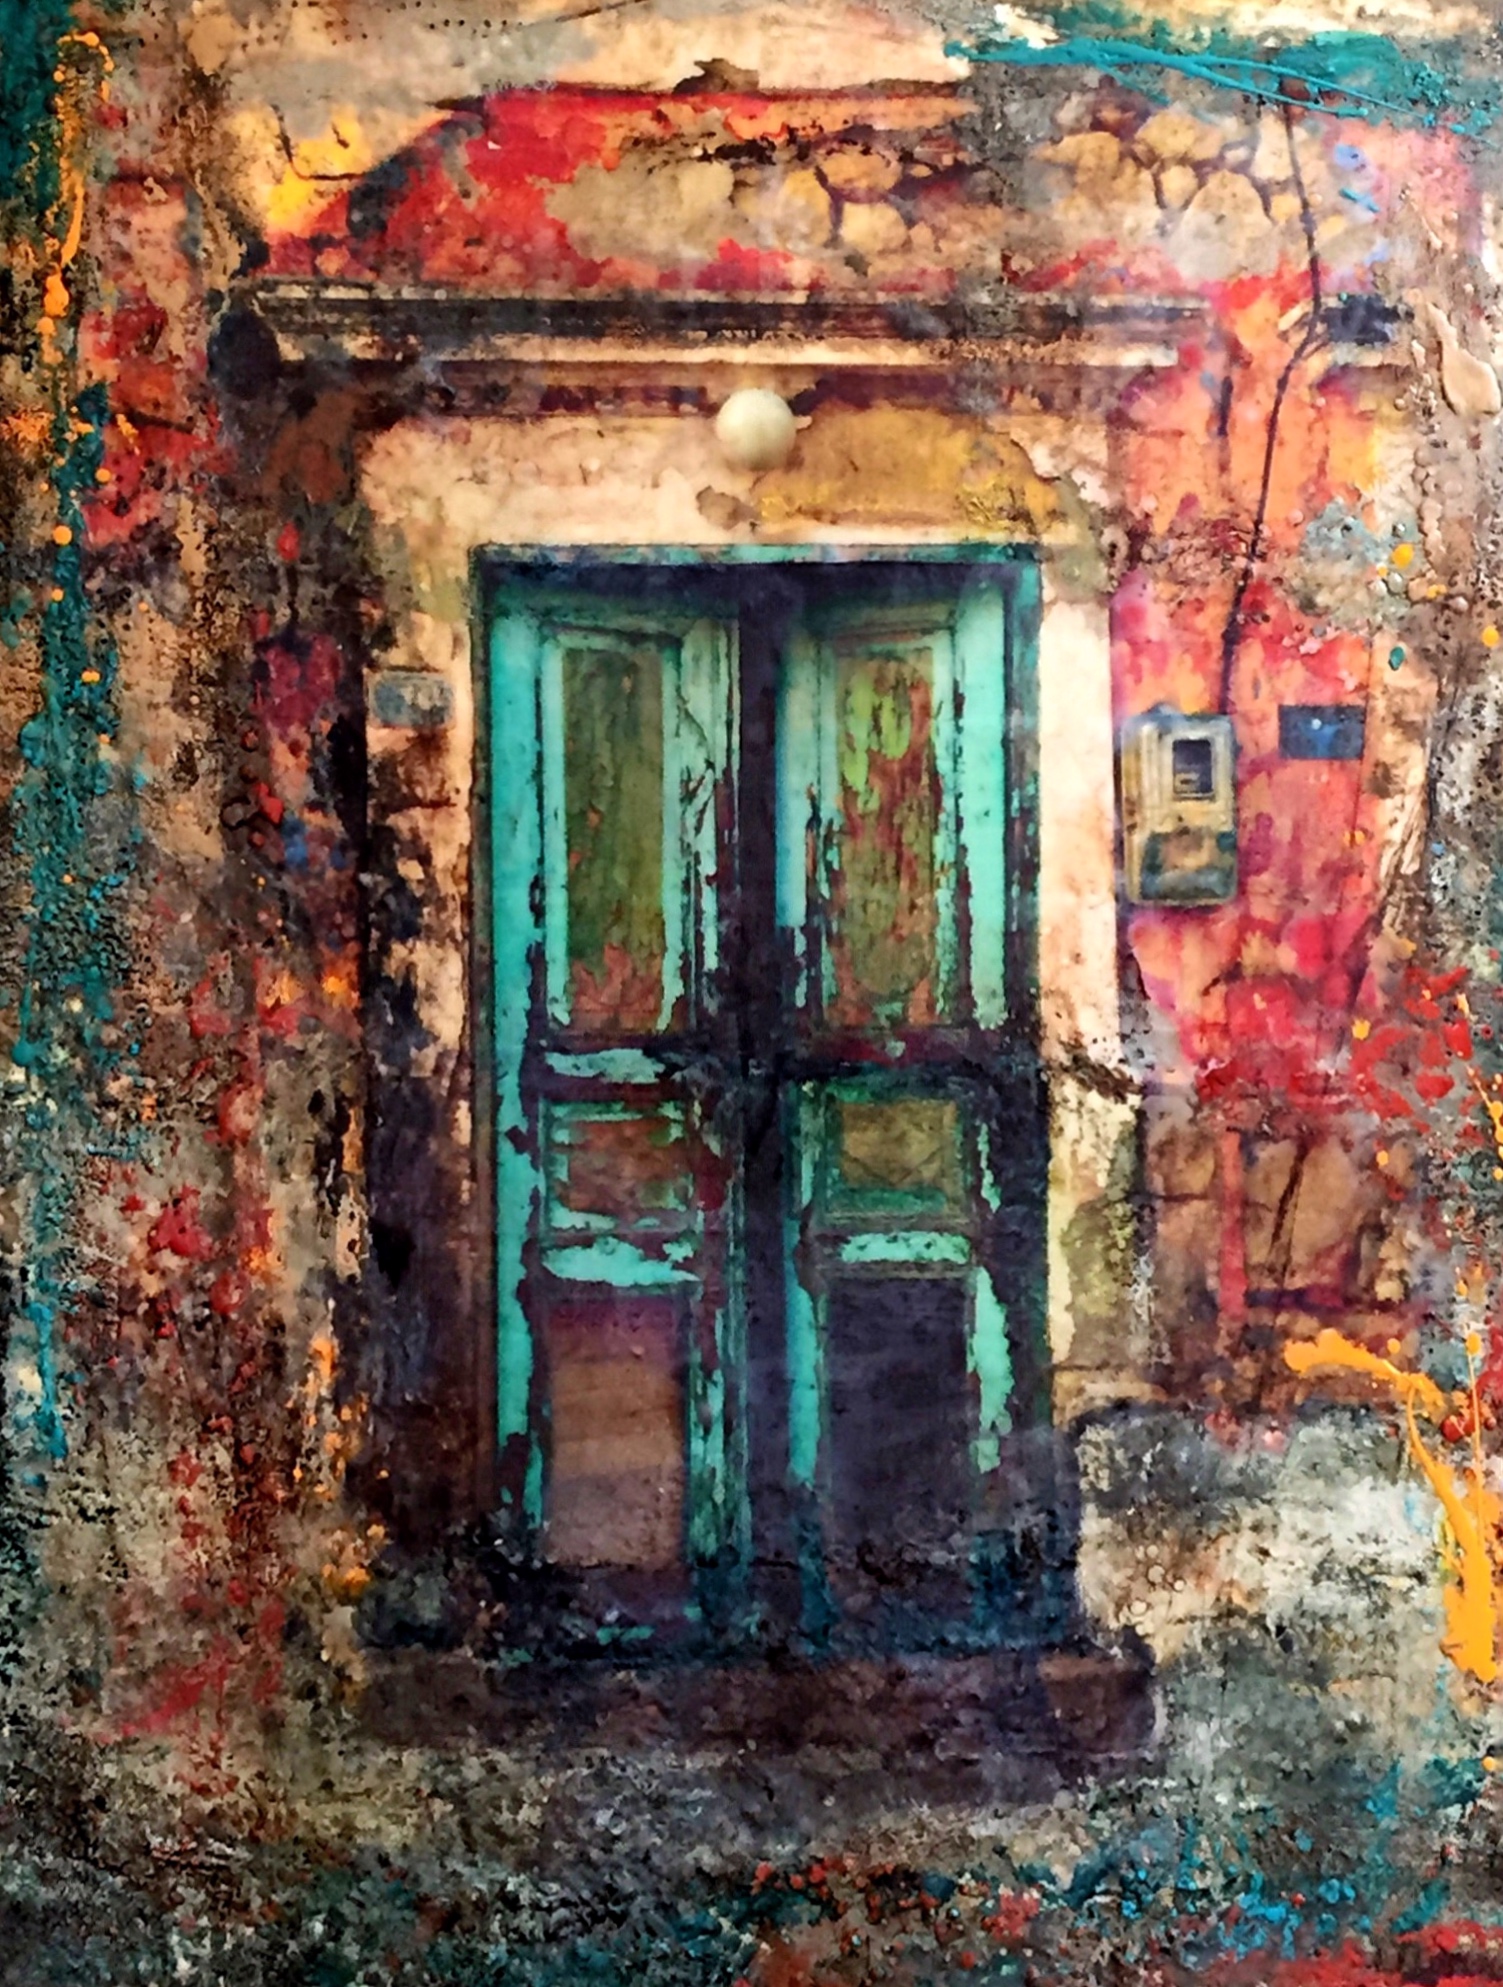 Ancient Doors of Greece, encaustic painting by Lee Anne LaForge | Effusion Art Gallery + Cast Glass Studio, Invermere BC